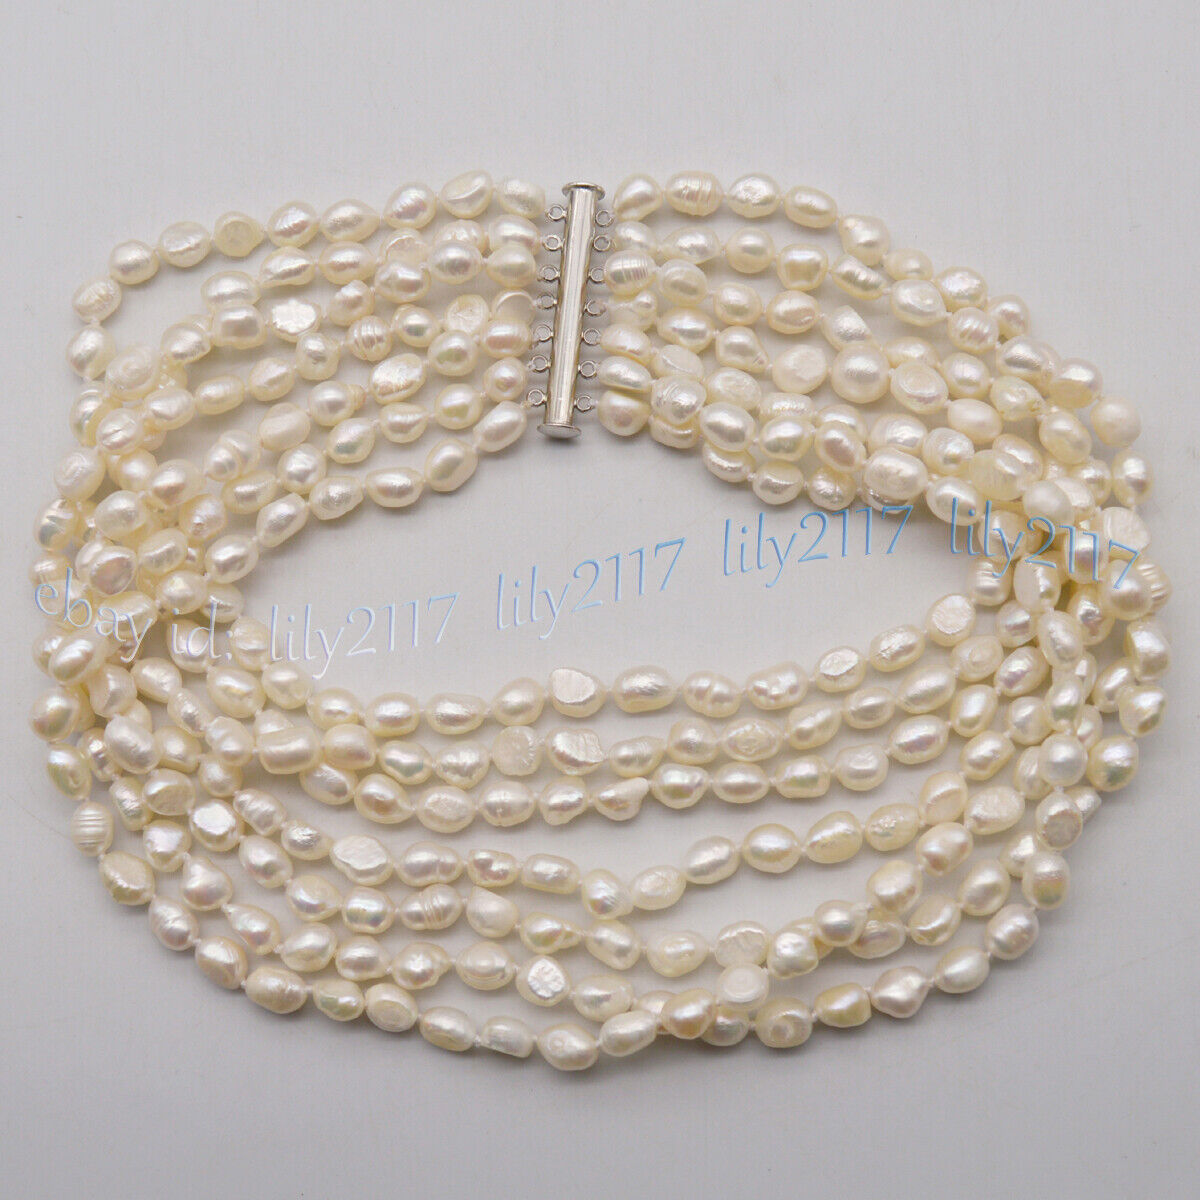 7 Rows Natural 7-8mm White Freshwater Baroque Pearl Choker 